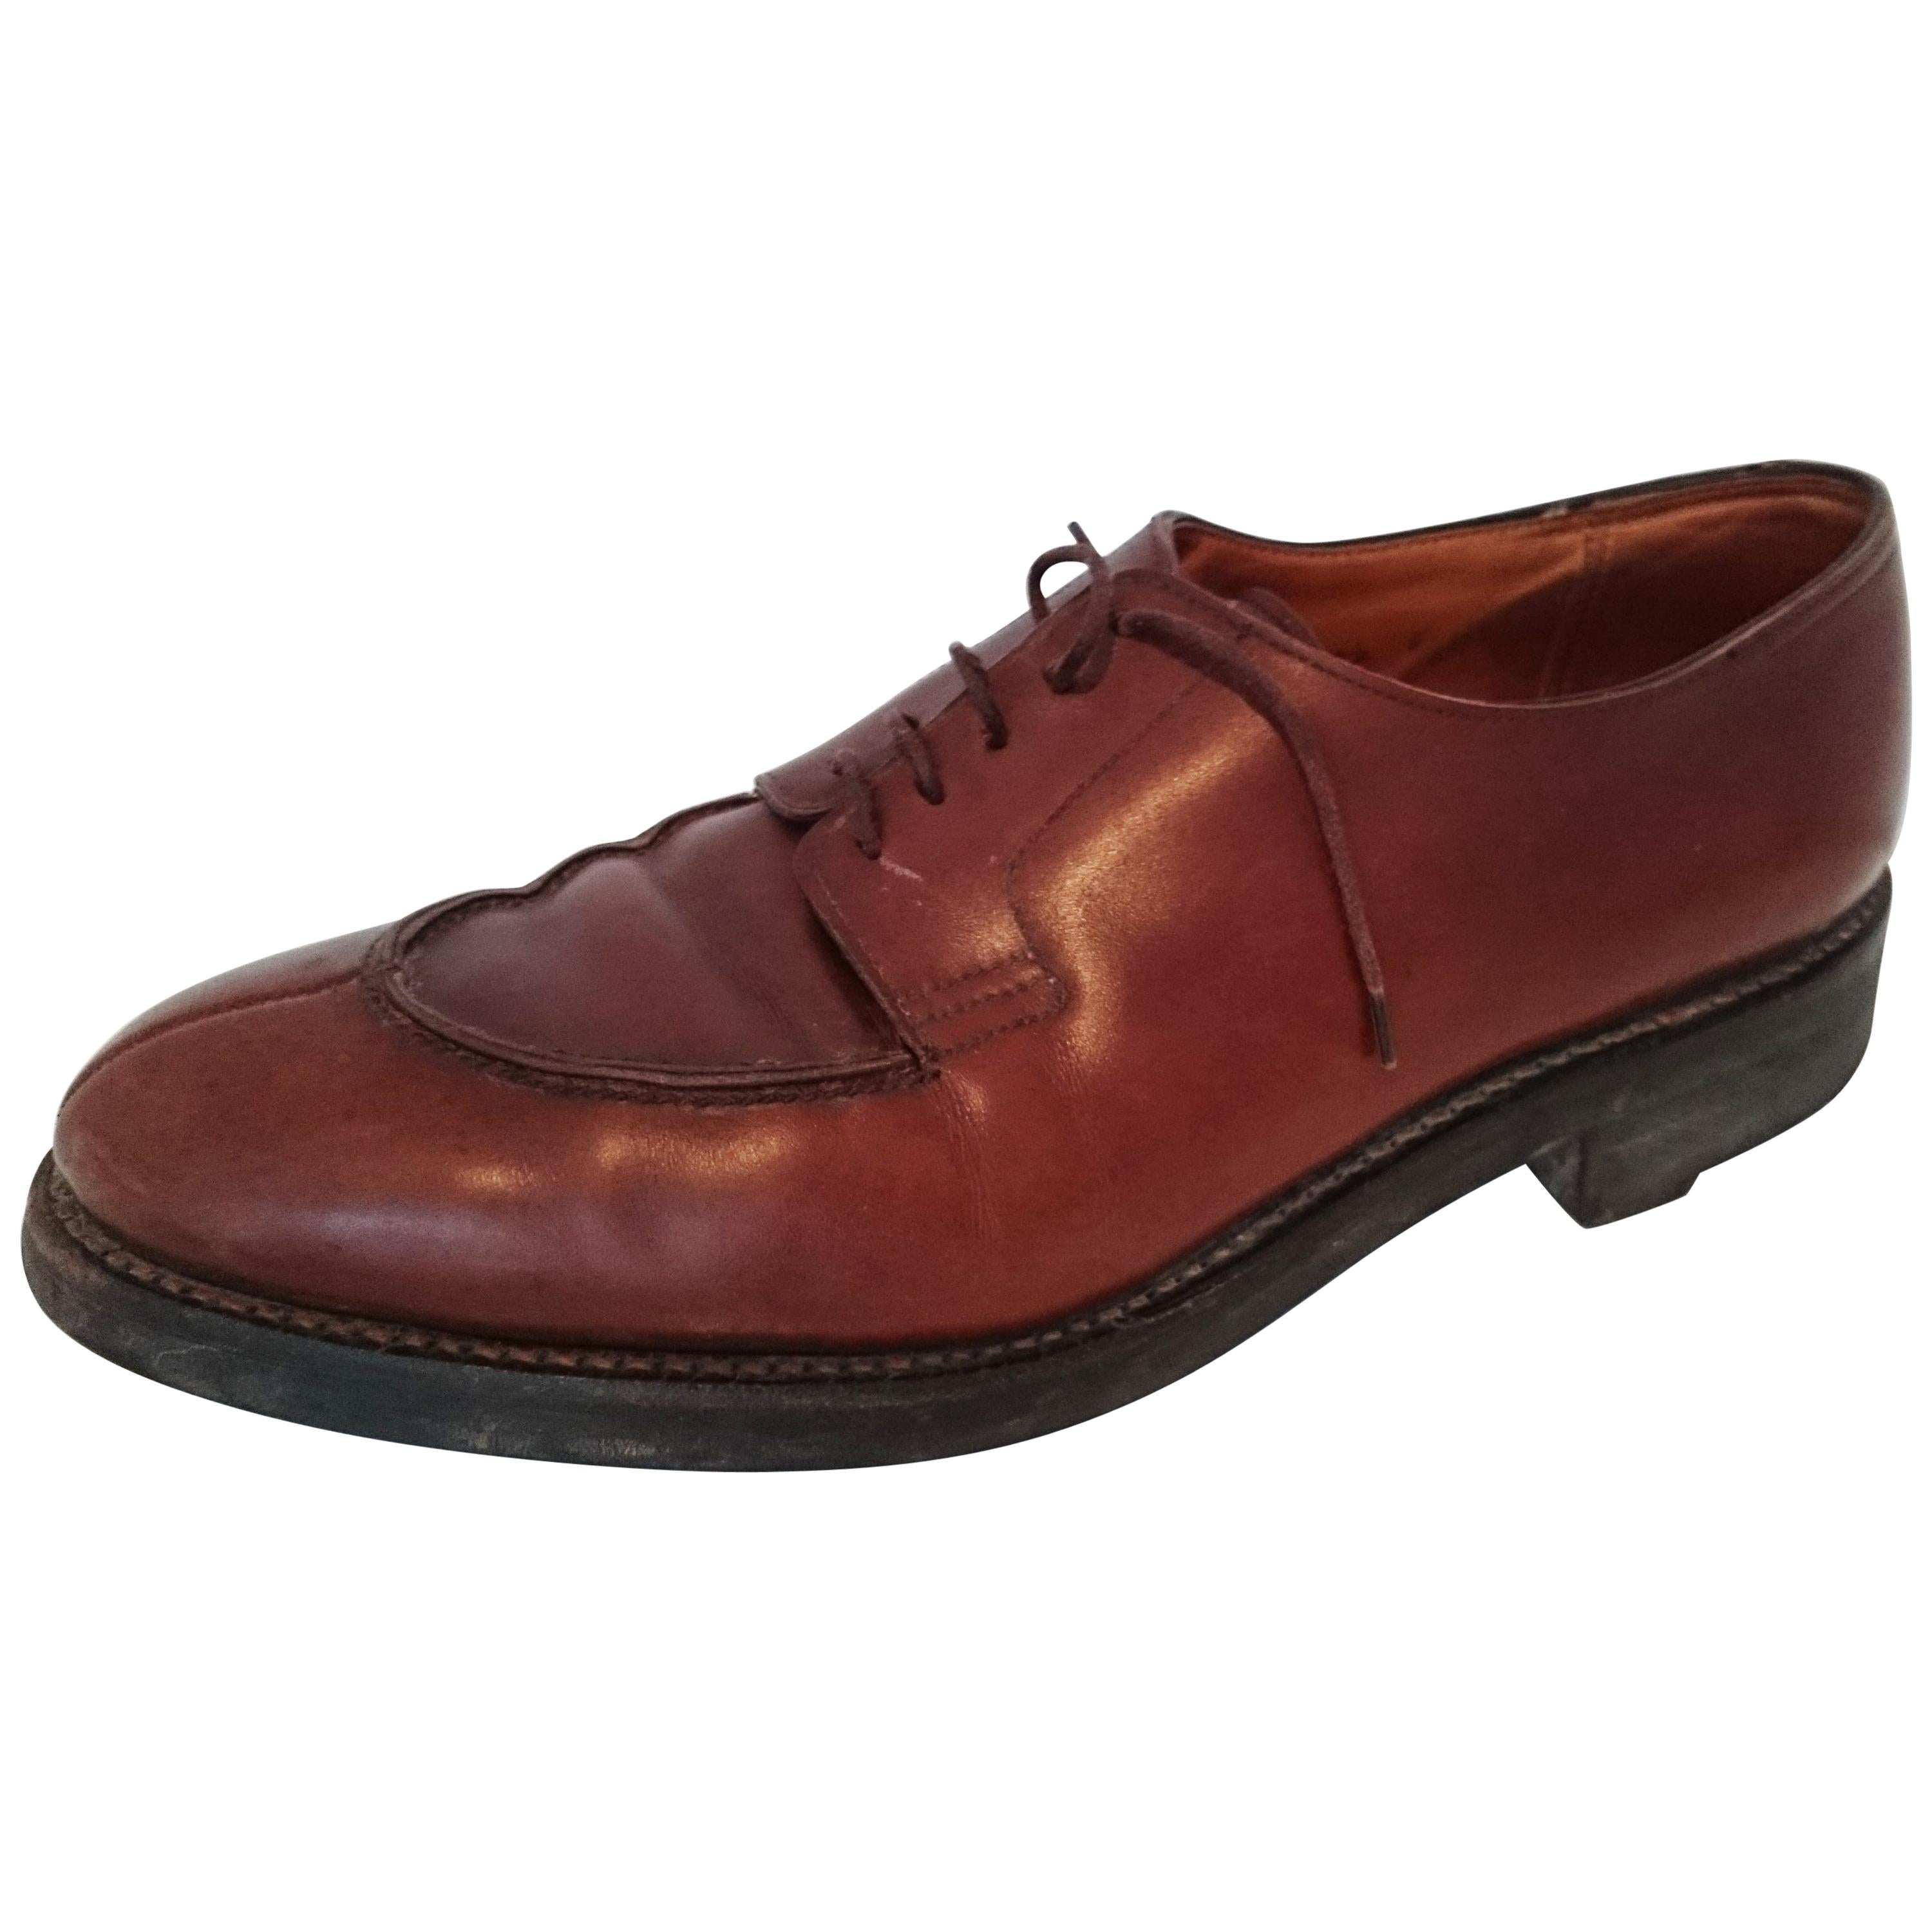 John Lobb Leather Brown  Laced Up Shoes. Great conditions. Size 7.5 (UK) For Sale